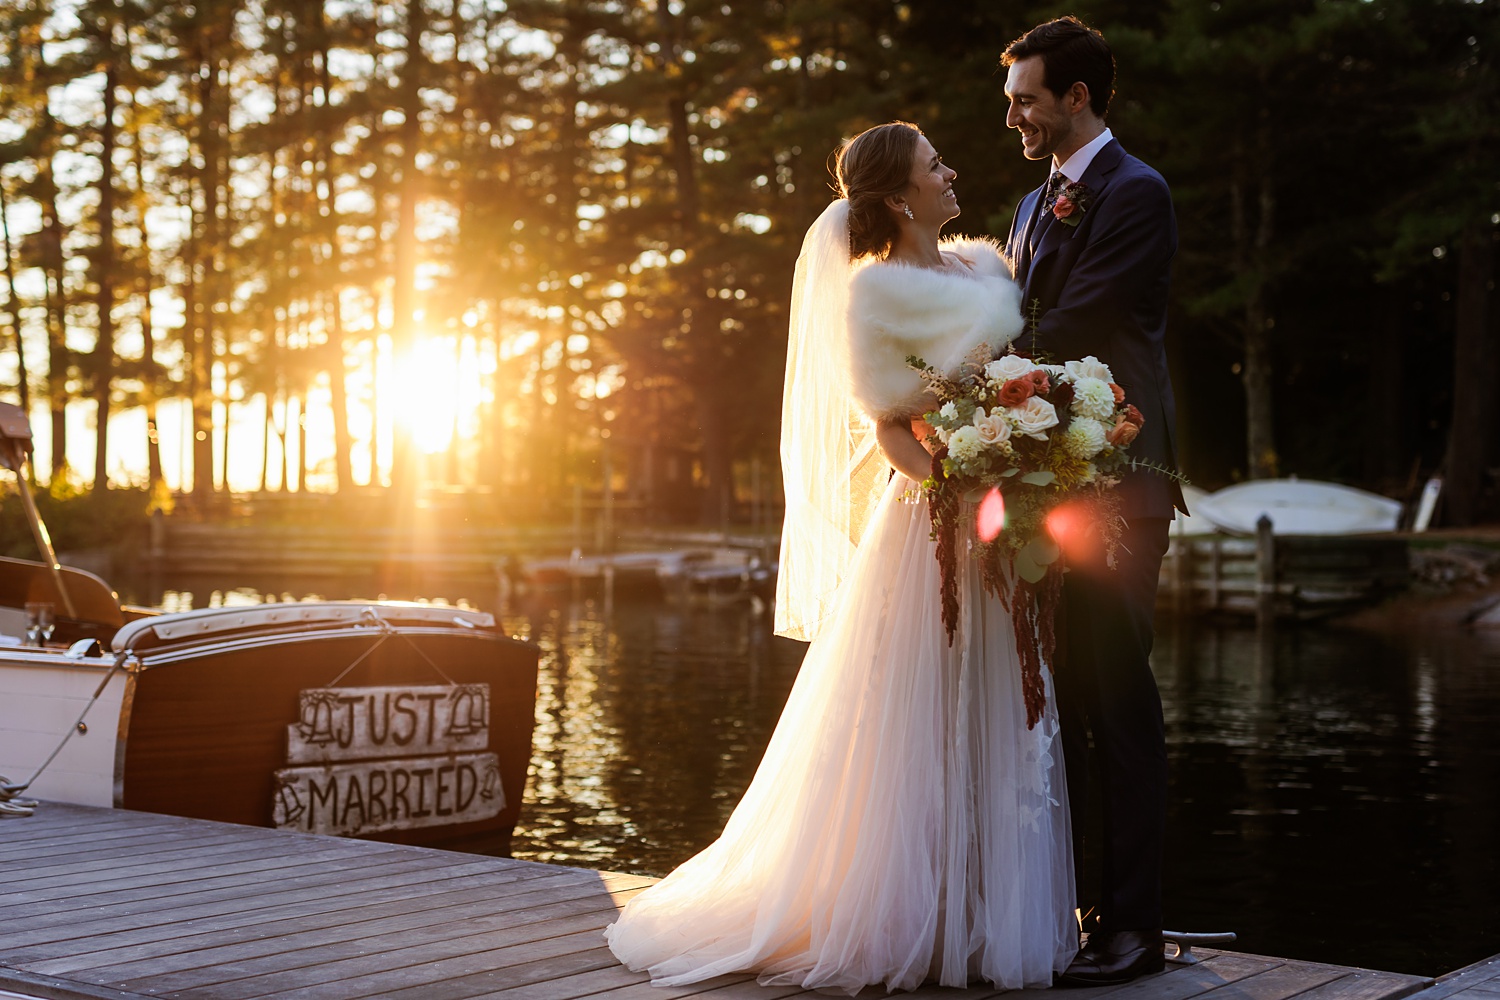 The couple share a moment in front of the setting sun and Migis Lodge's boat on their wedding day